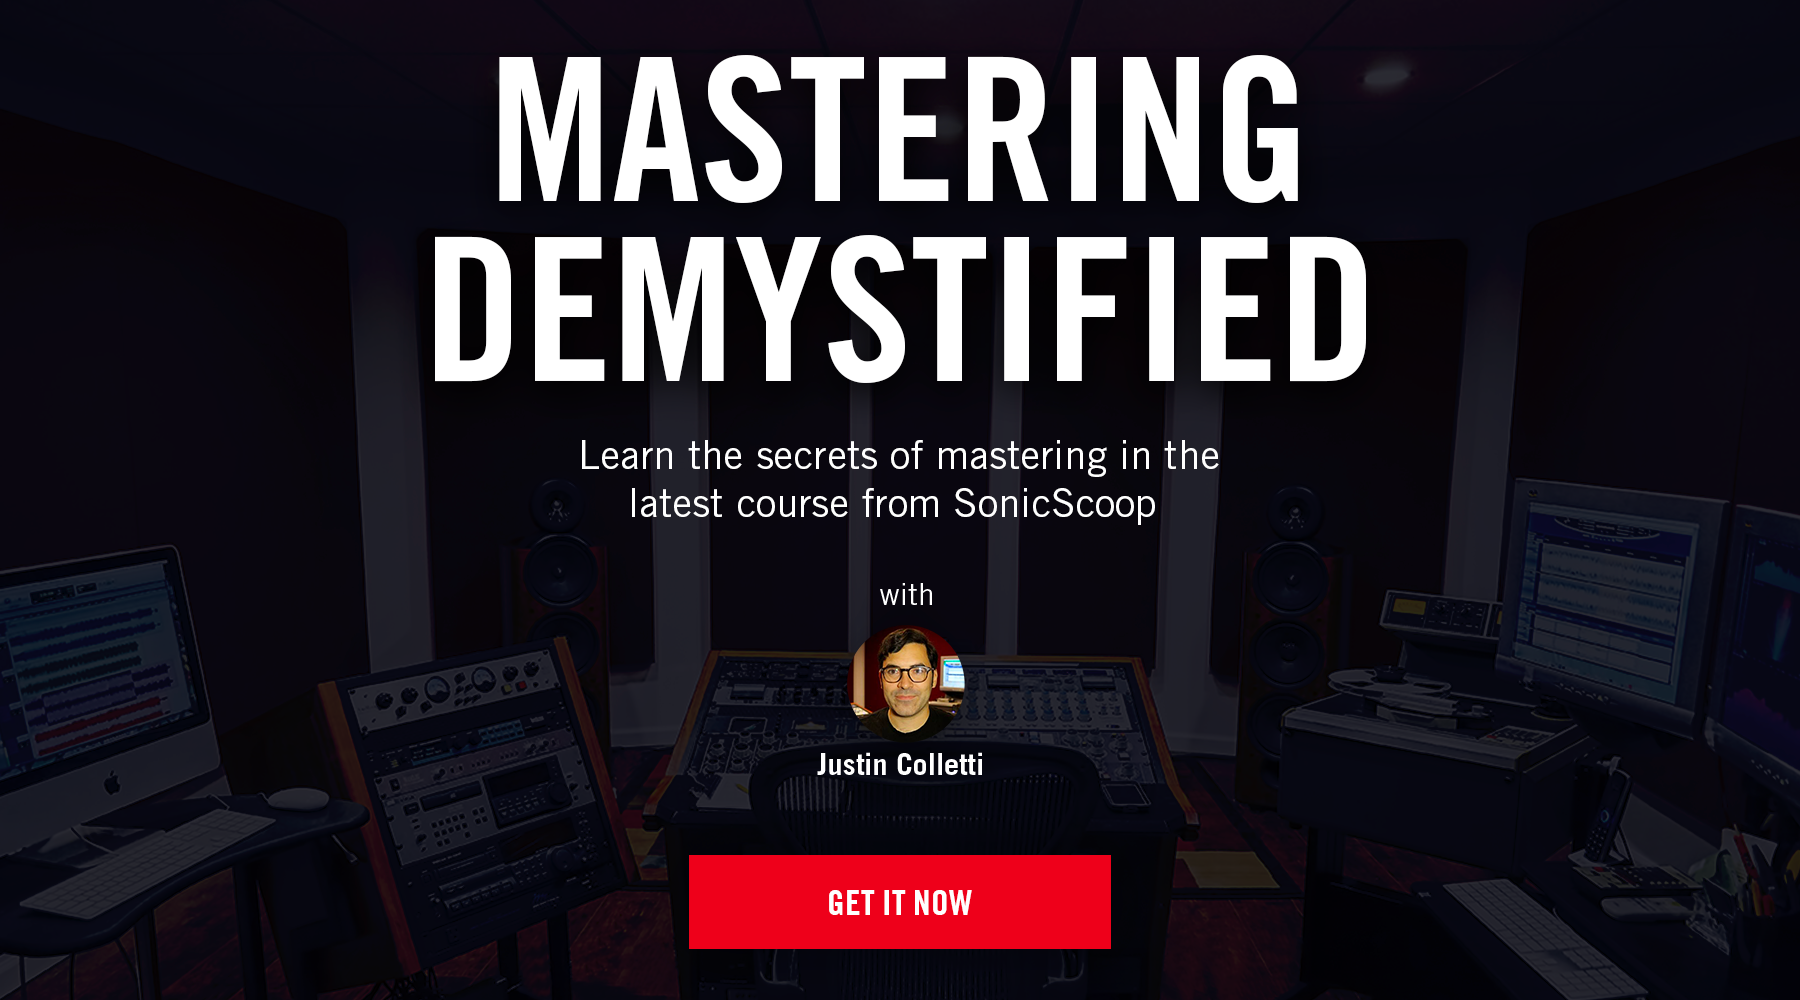 New Course Out Now: Mastering Demystified